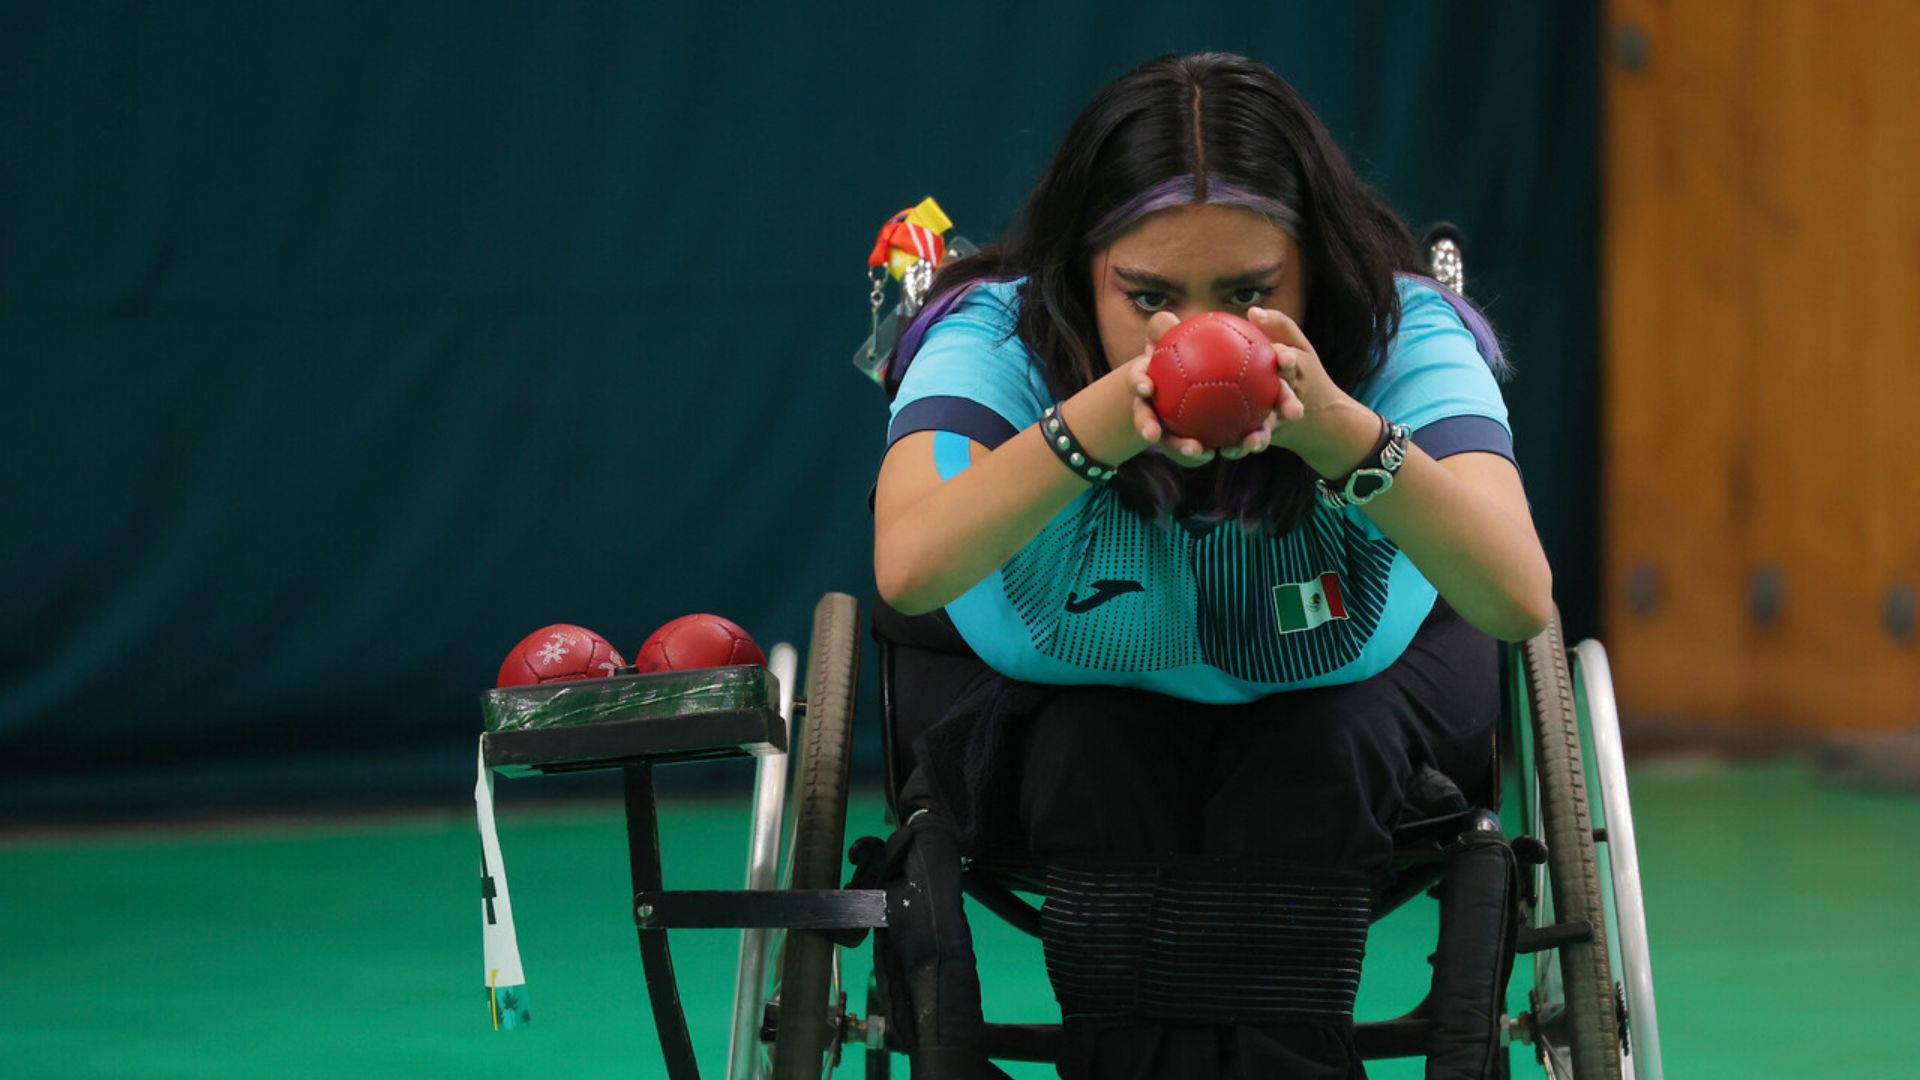 Boccia: Mexican Representatives Shine and Aim for Two Gold Medals